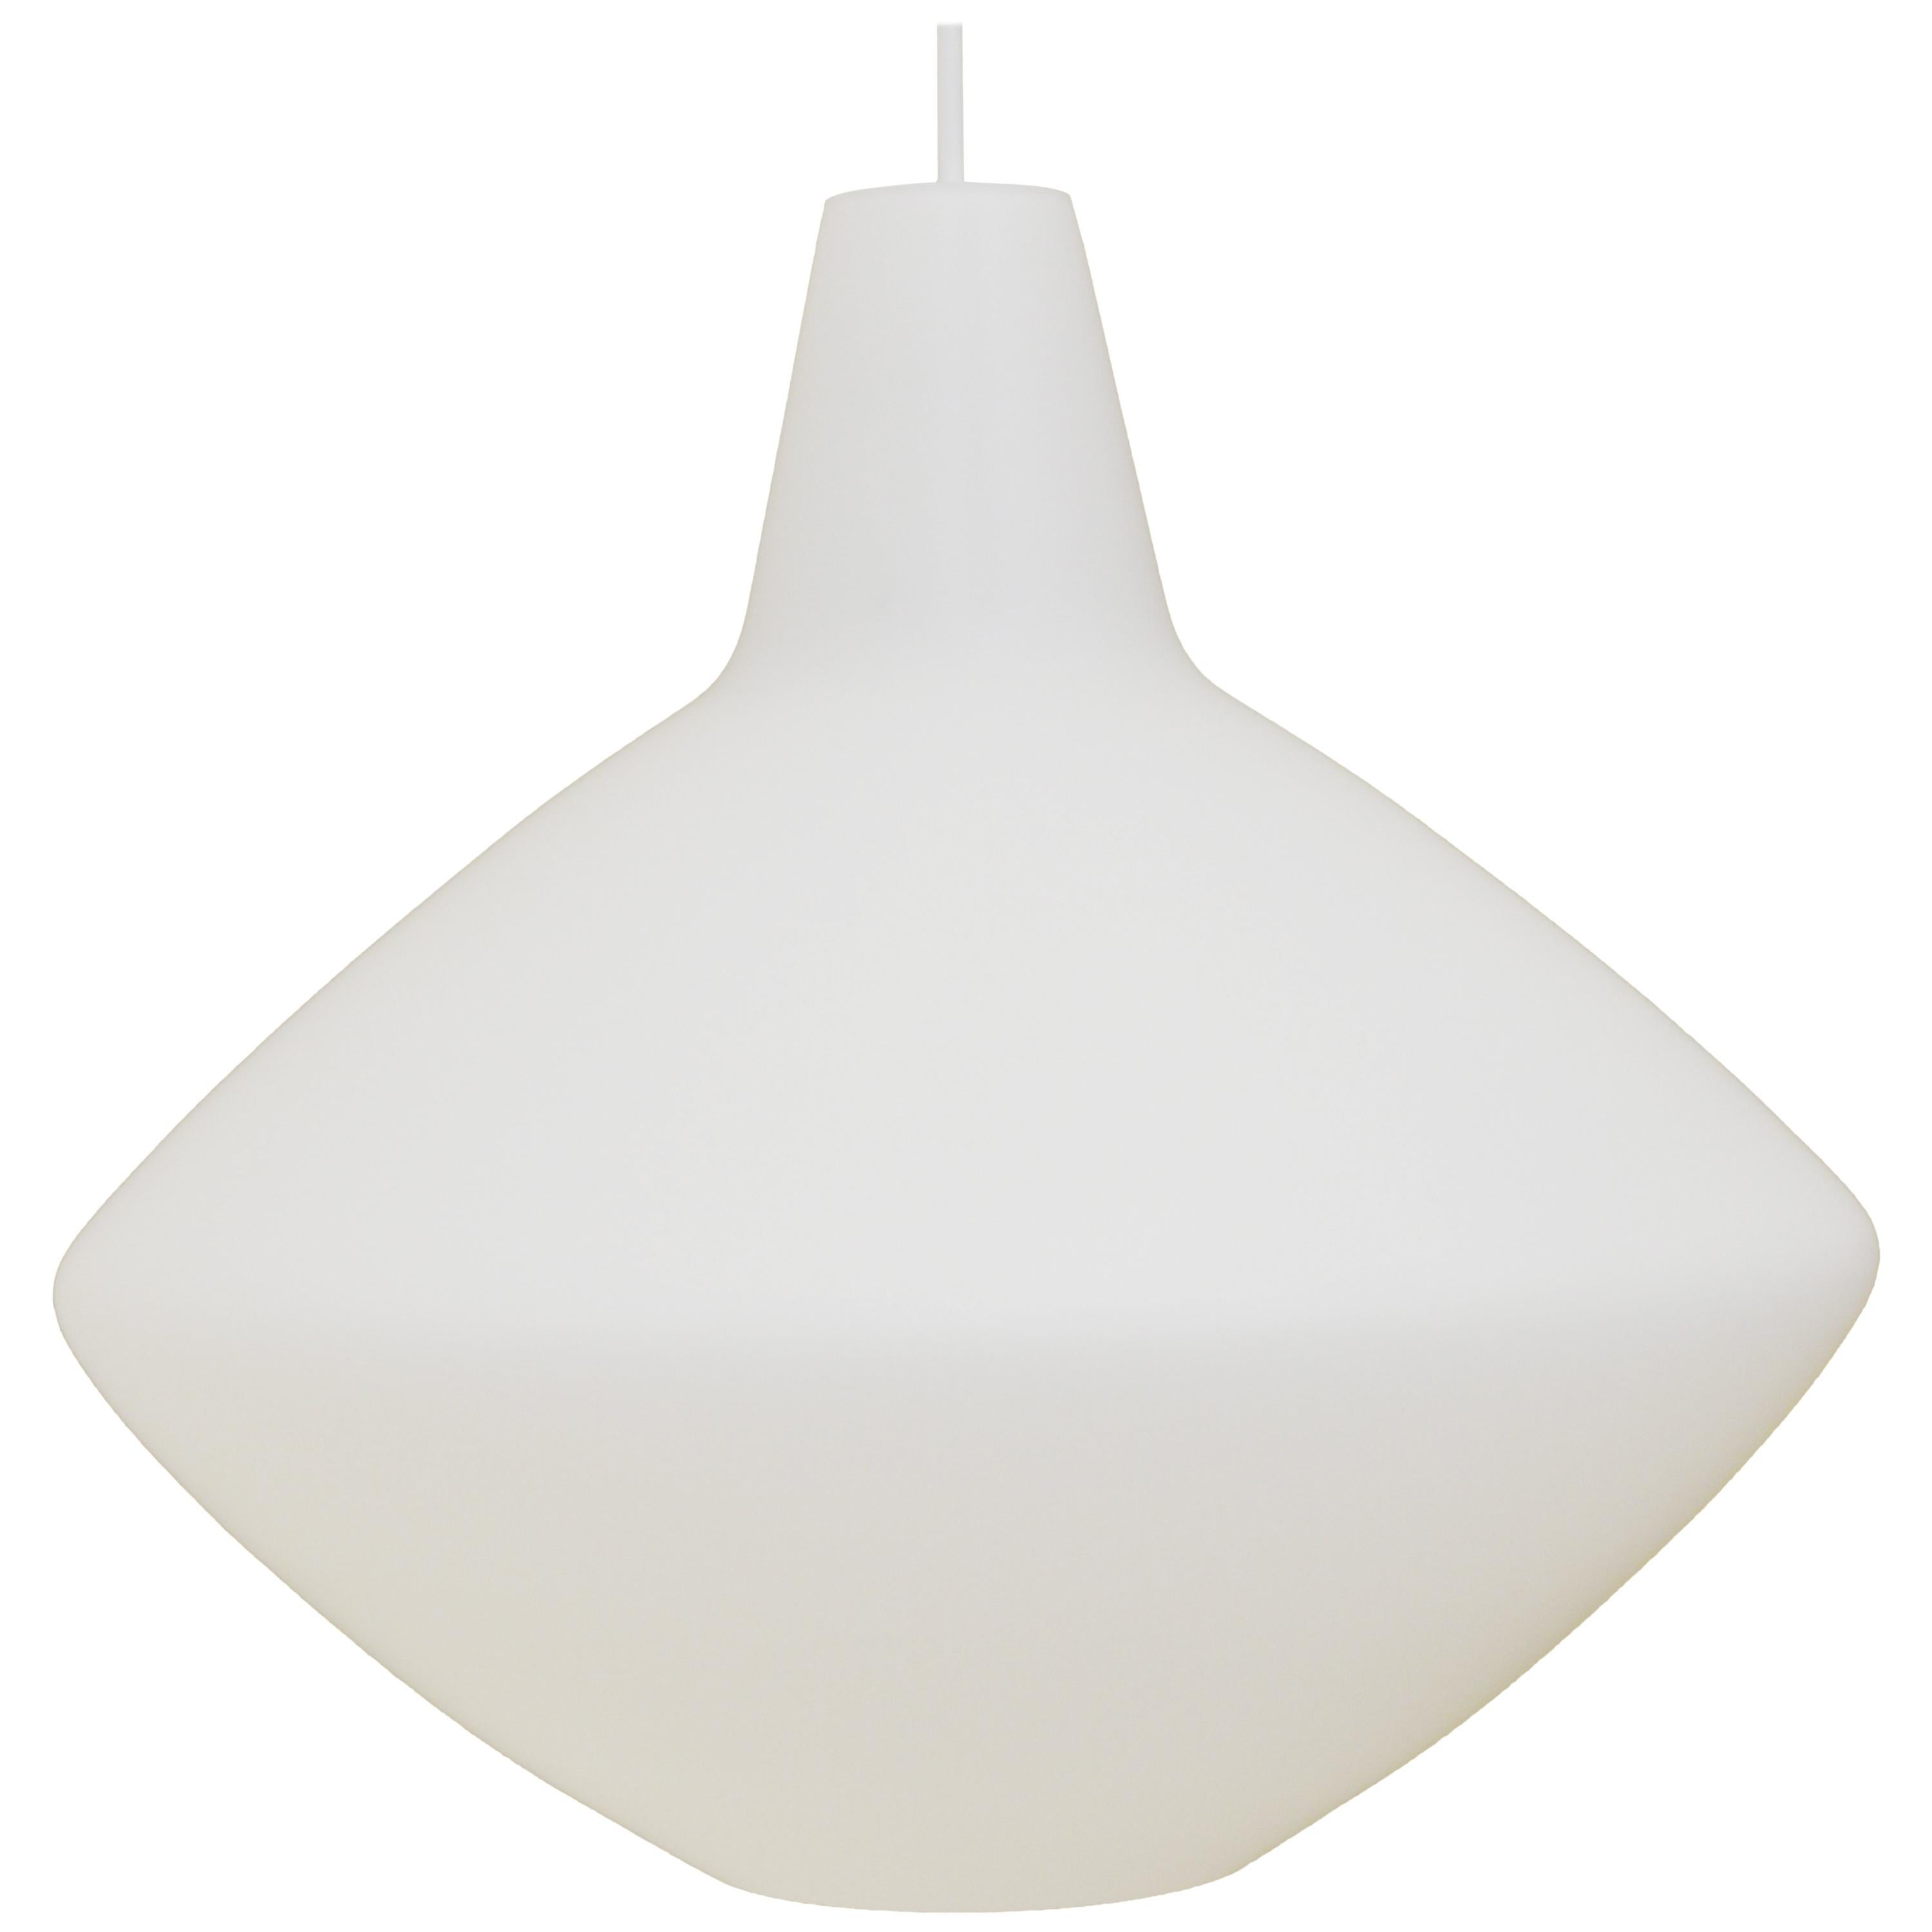 Midcentury Opaline Glass 'Onion' Lamp by Lisa Johansson-Pape For Sale